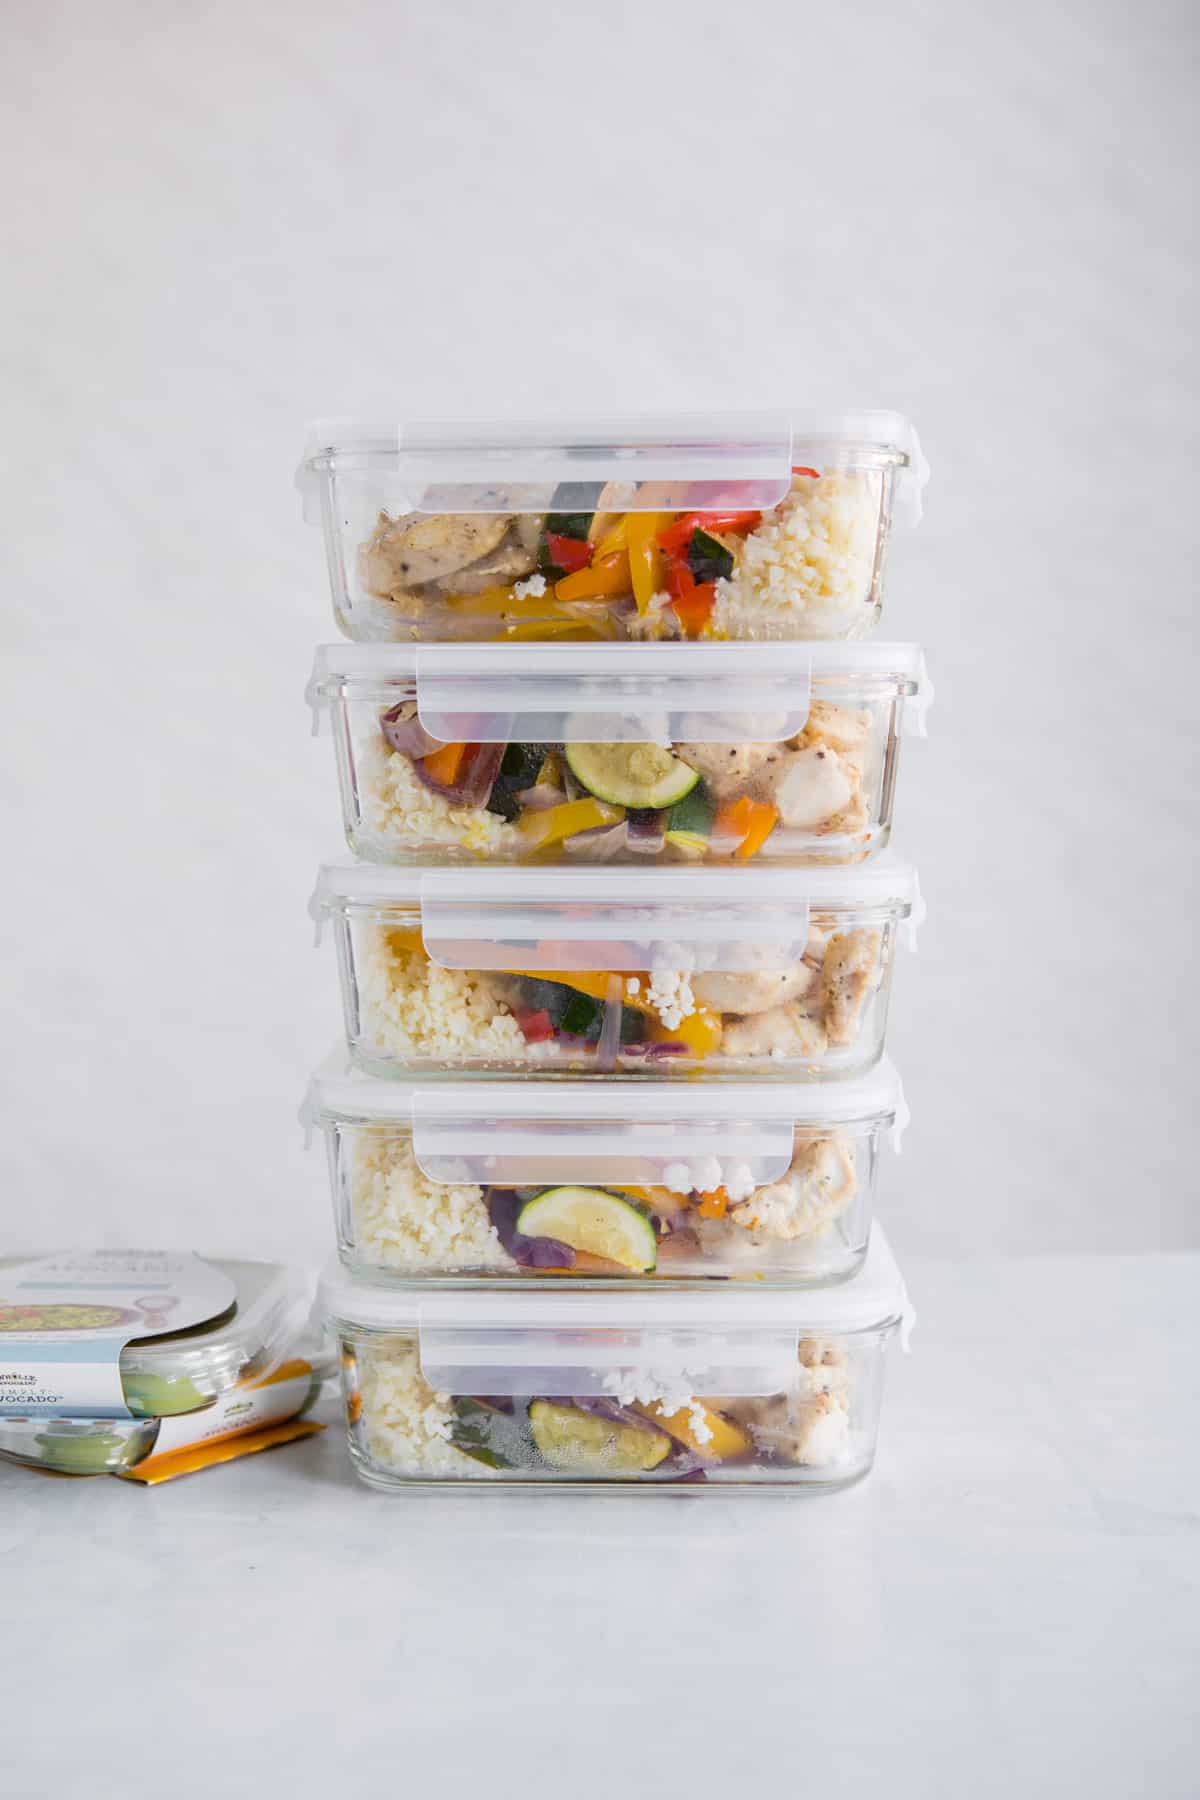 Chicken and Veggie Meal Prep Bowls